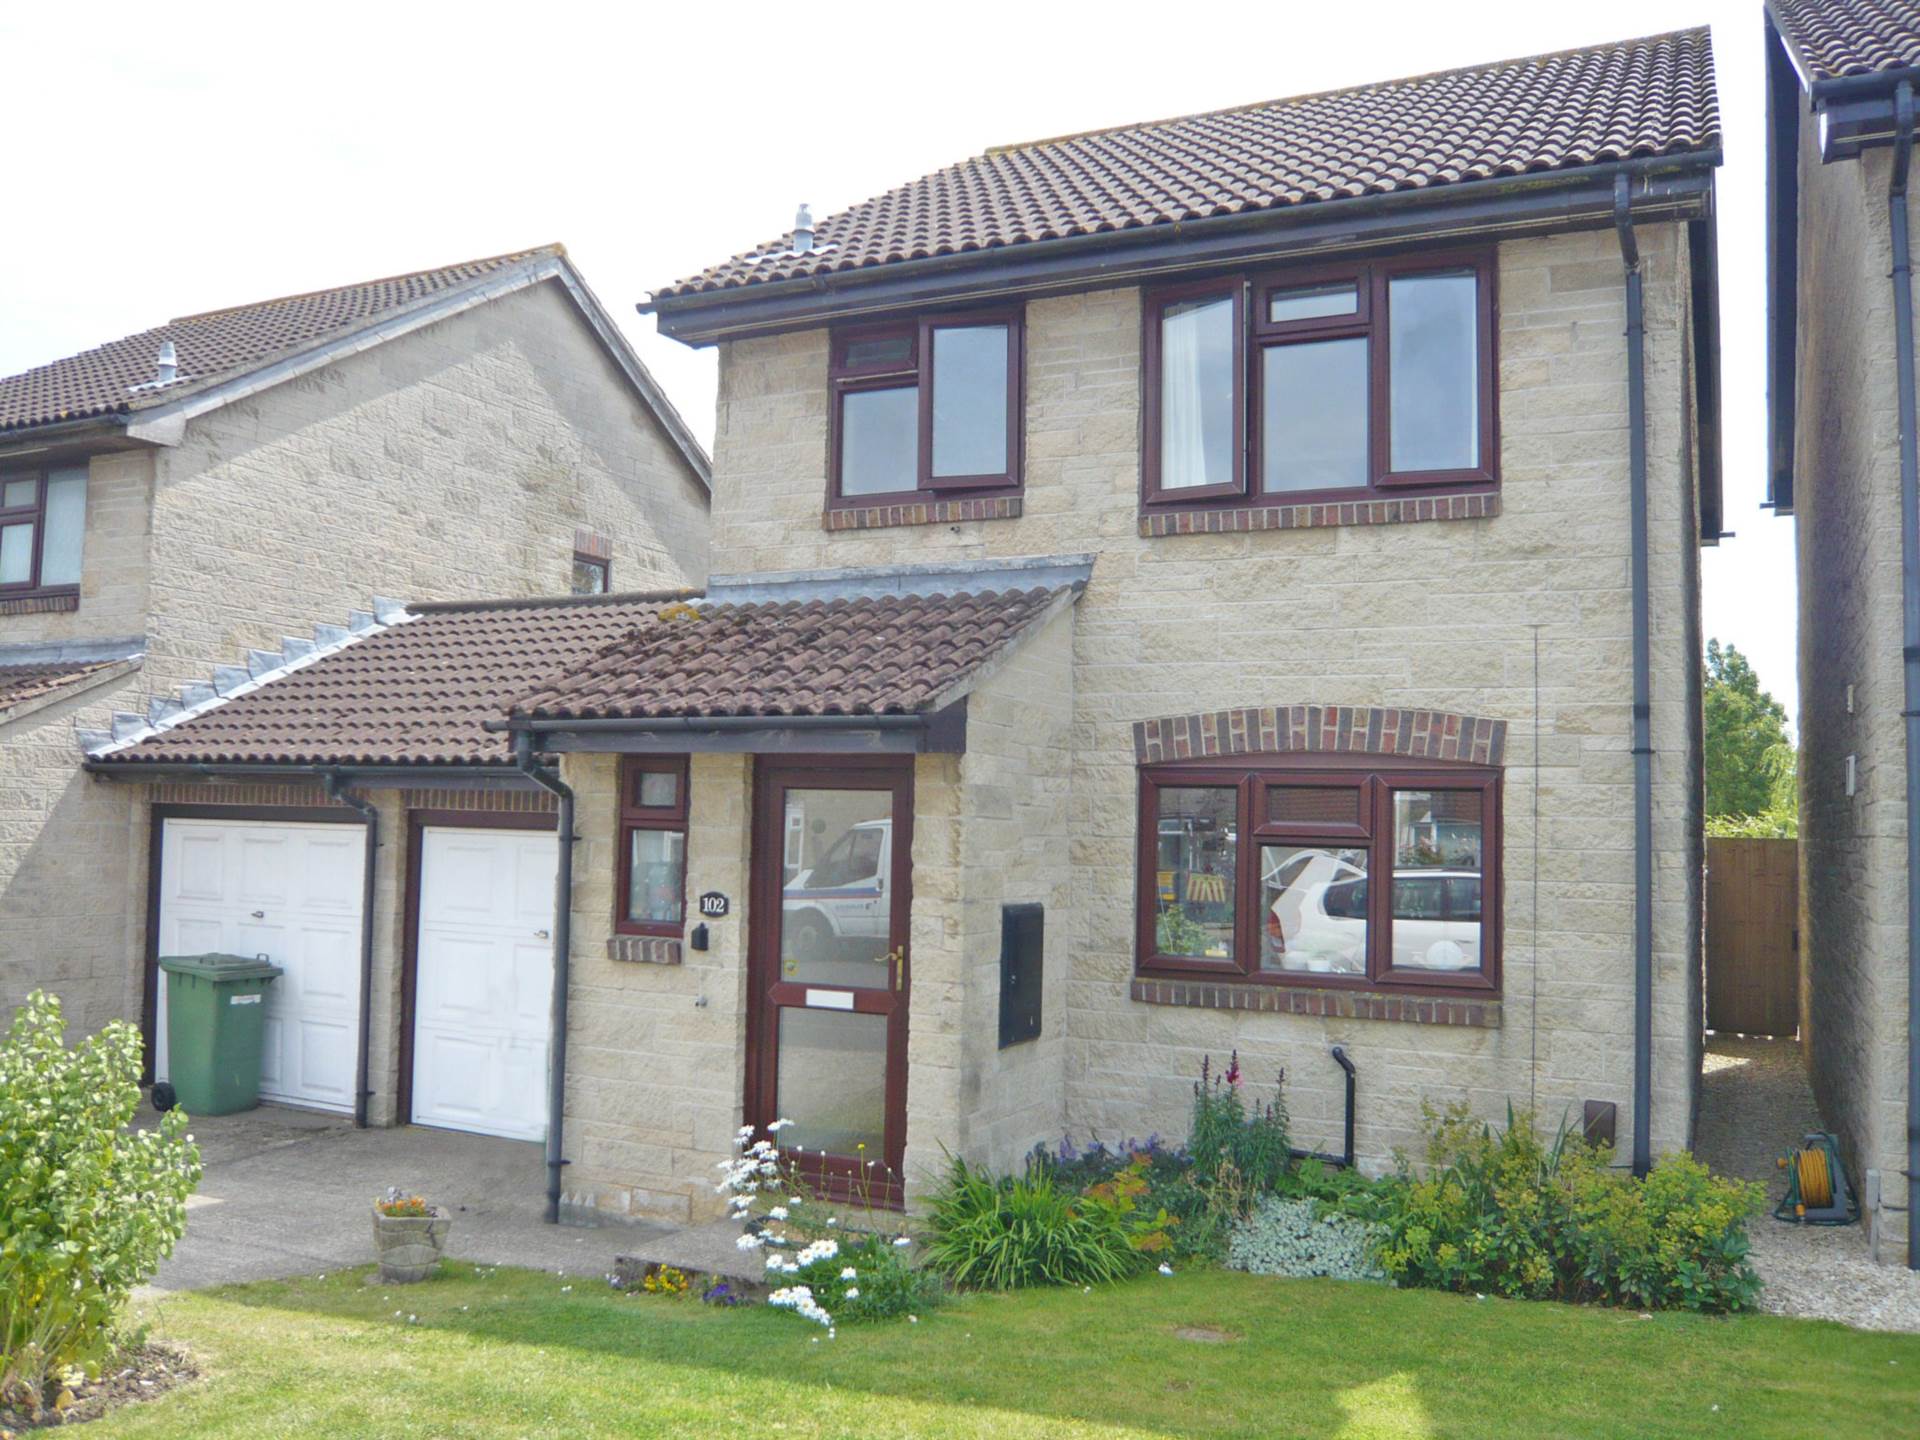 3 bed Detached House for rent in Frome. From Lewis Gray